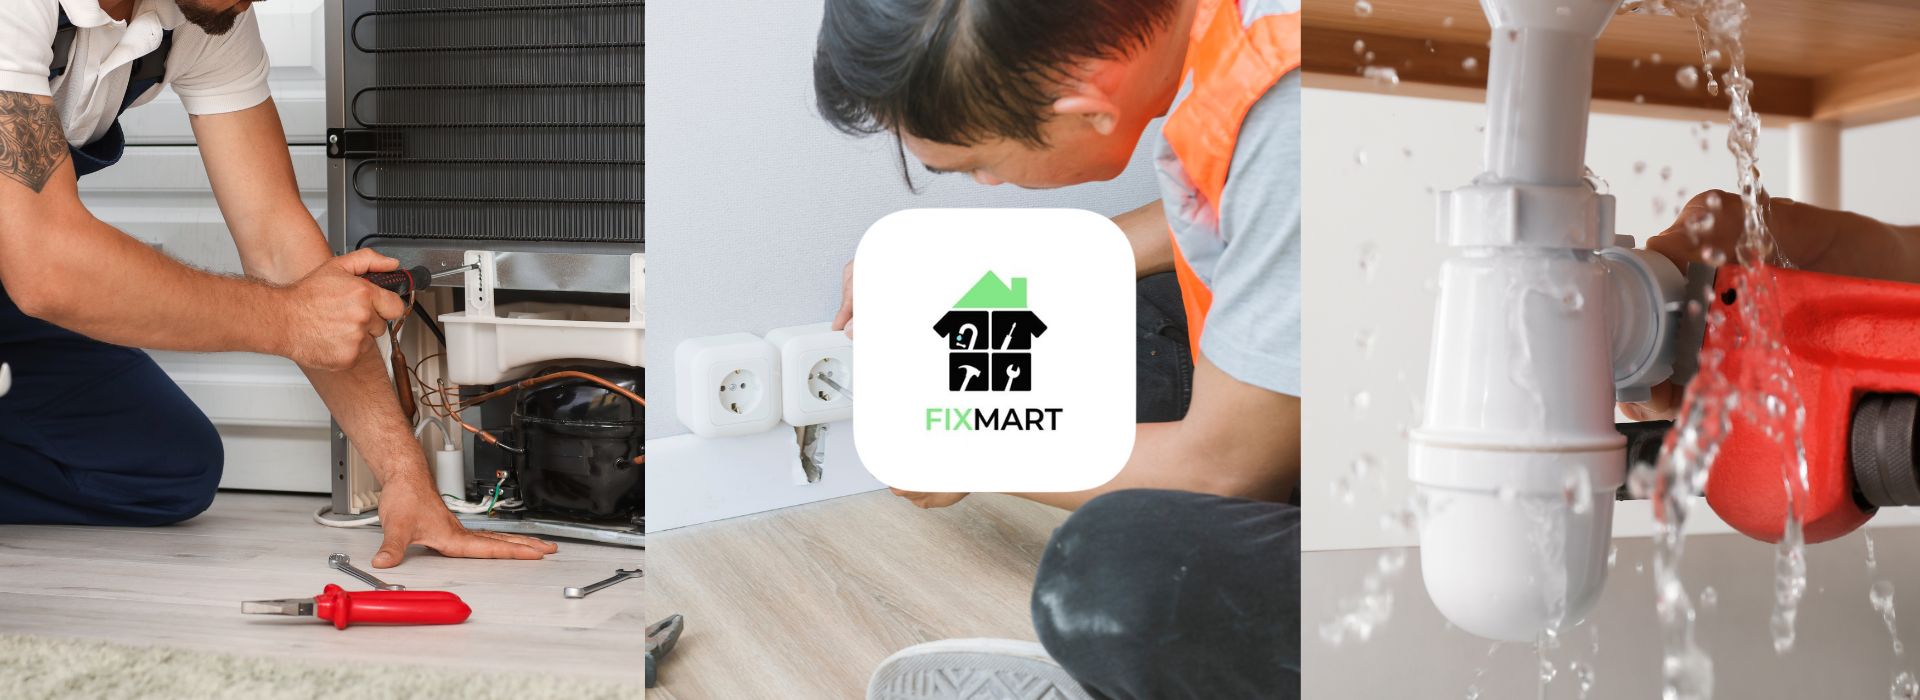 Plumbing solutions in Singapore is easy with FixMart – Your Trusted Hub for Plumbers